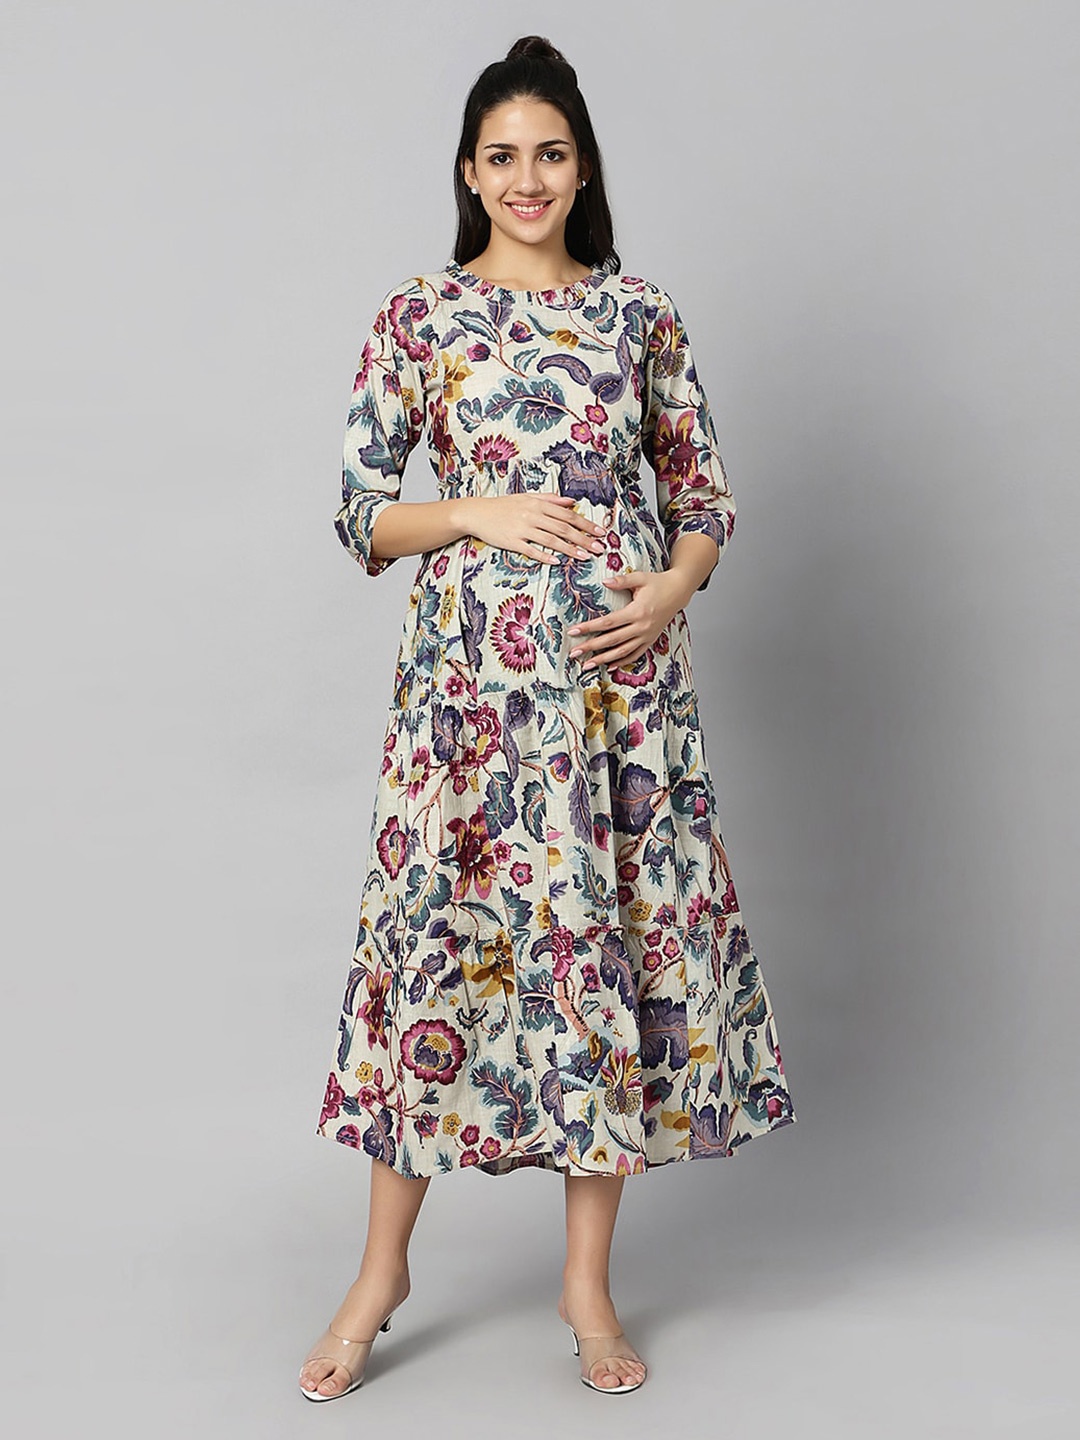 

Aanyor Maternity Floral Printed Tiered Gathers Detailed Cotton Fit & Flare Dress, Beige